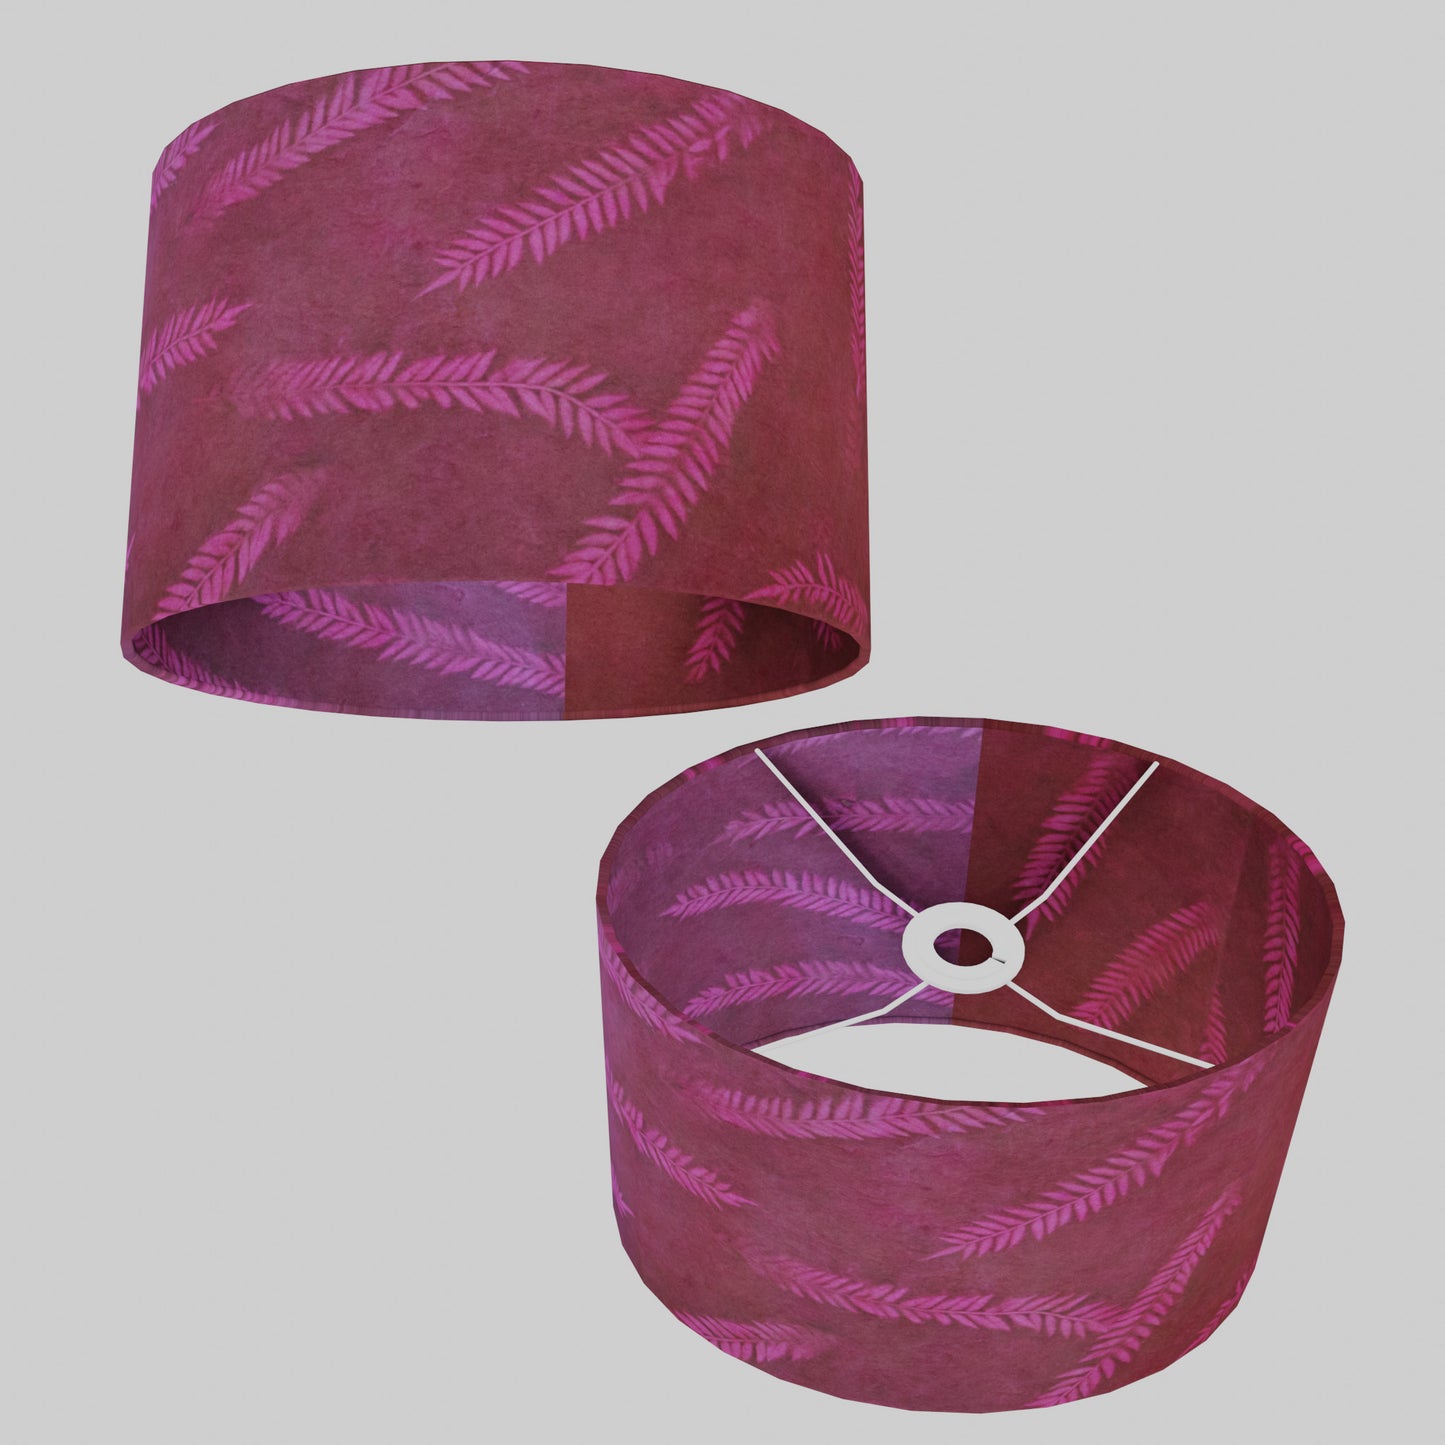 Oval Lamp Shade - P25 - Resistance Dyed Pink Fern, 30cm(w) x 20cm(h) x 22cm(d)